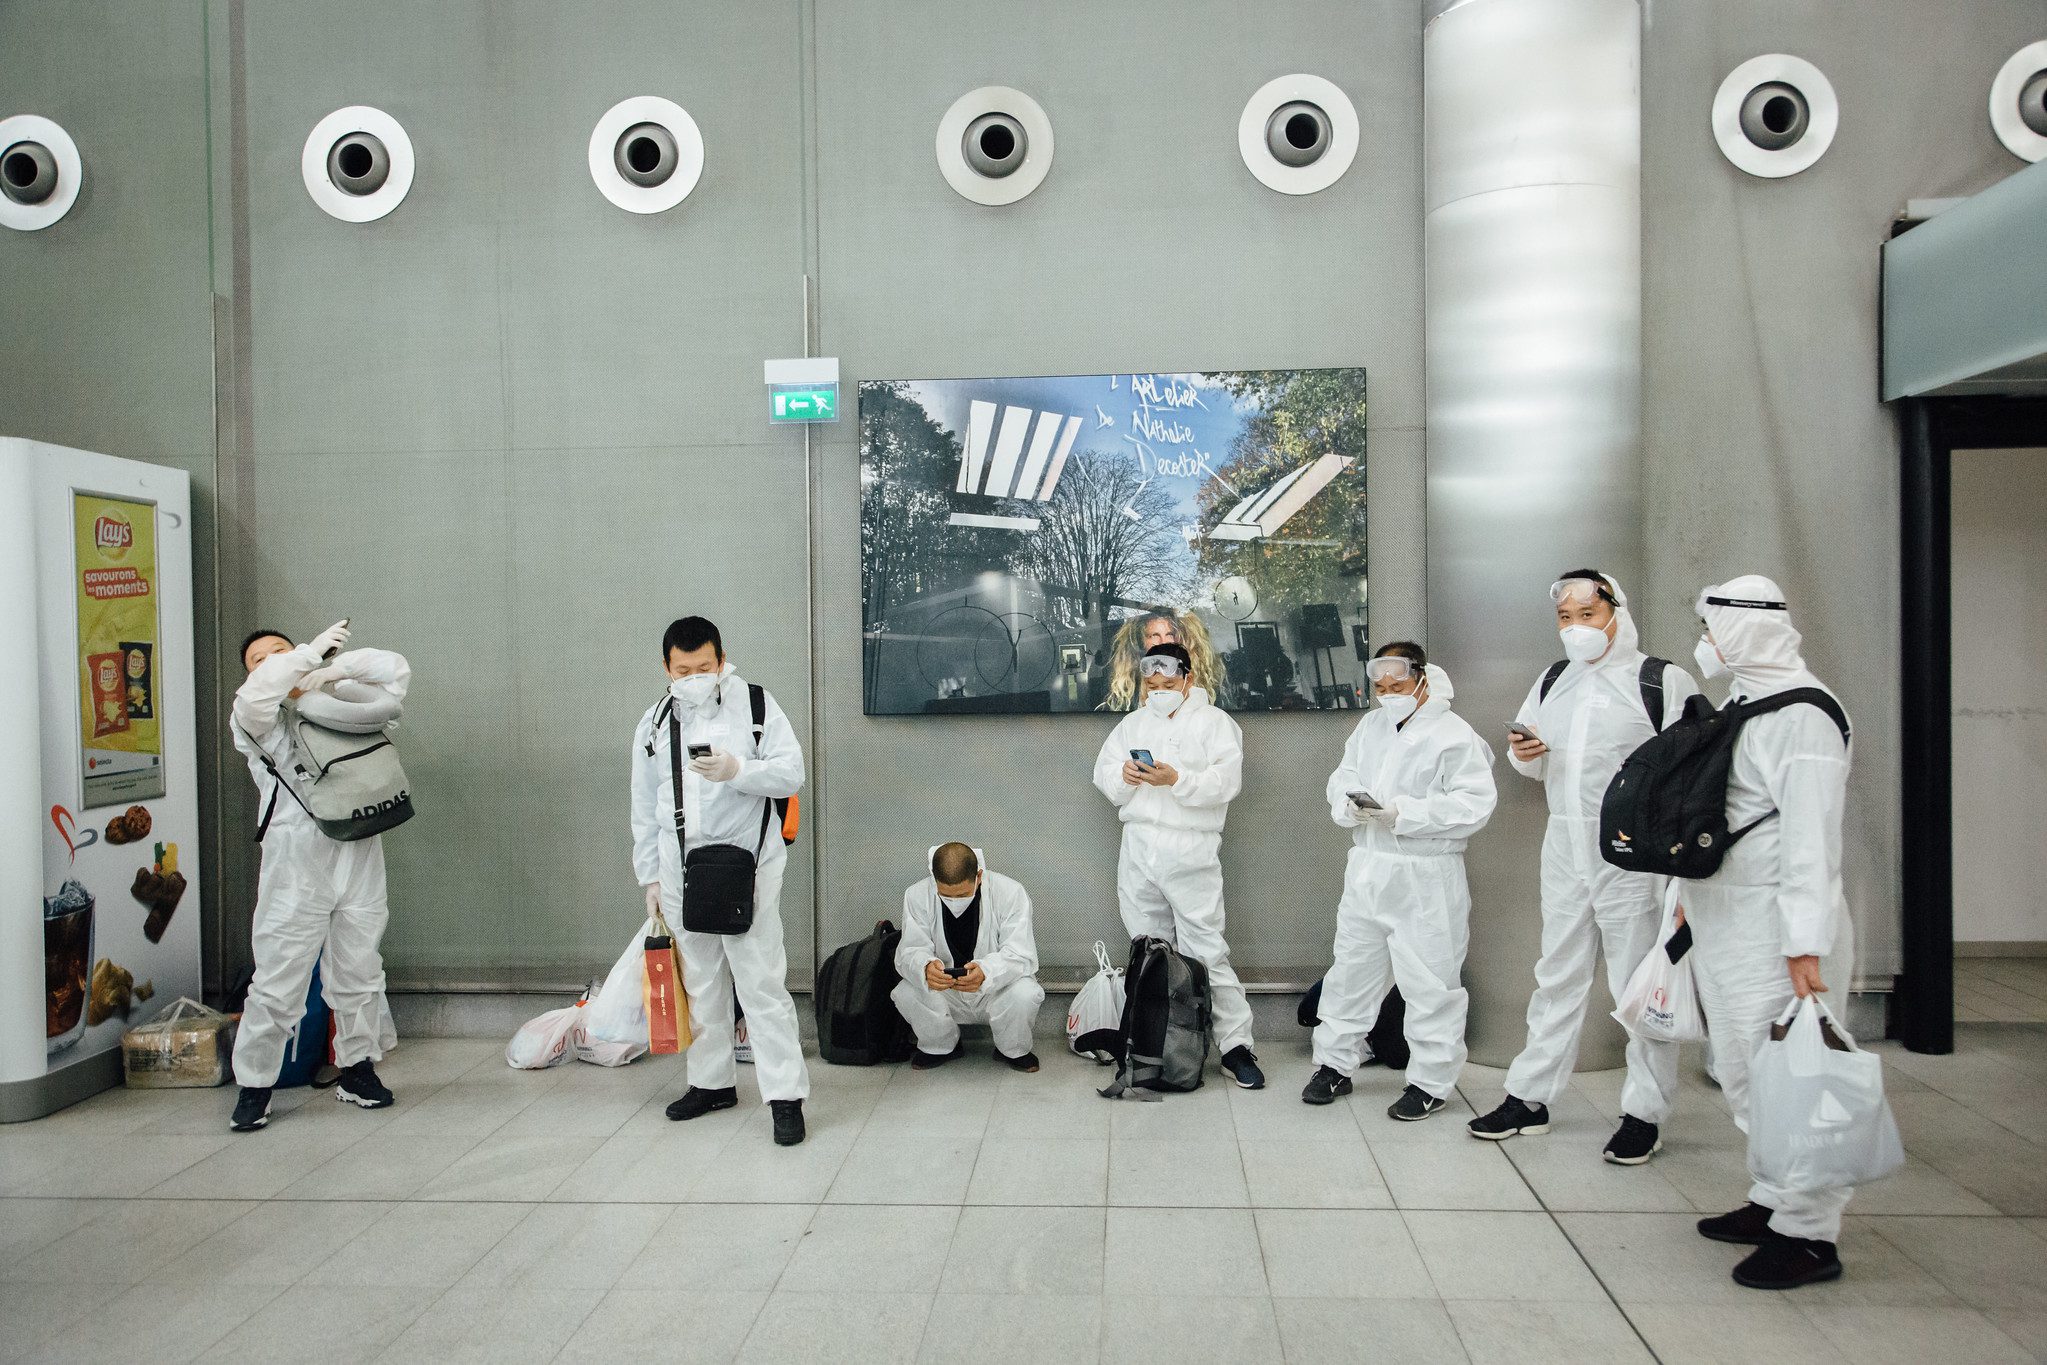 A group of Chinese tourists wear full protective suits against the COVID-19 virus wait at Roissy Charles de Gaulle Airport.